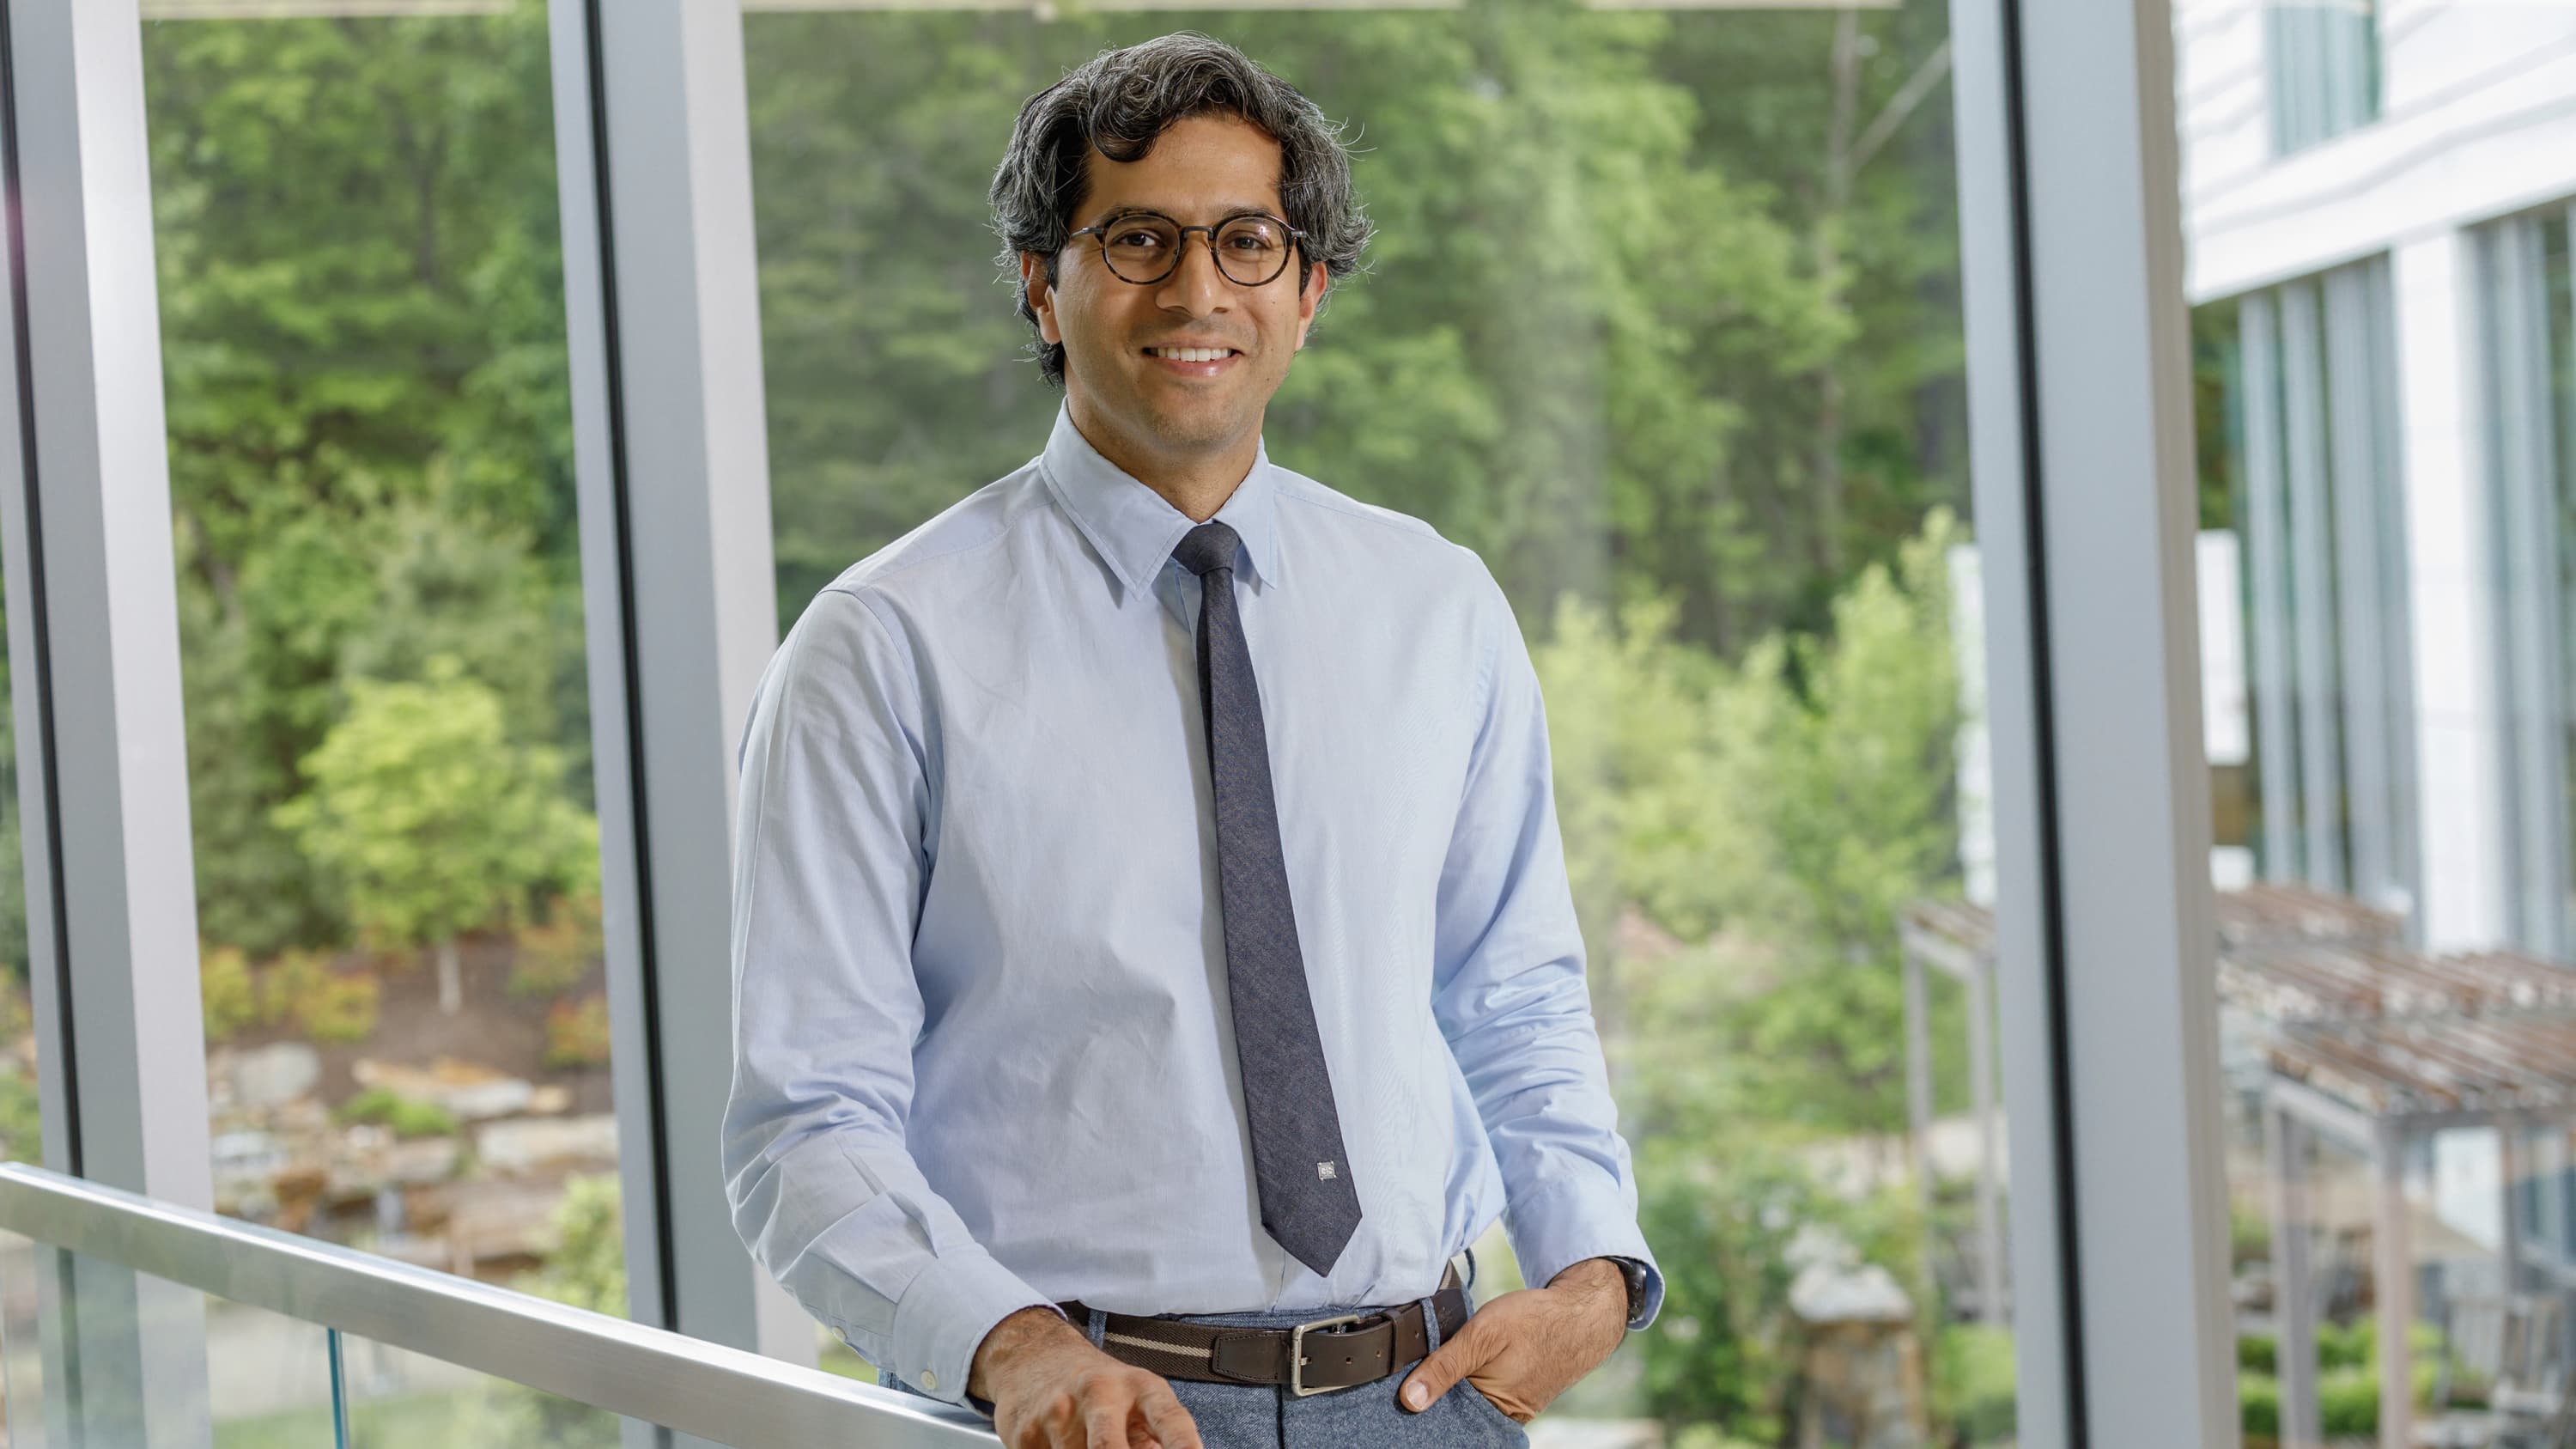 Vikram Reddy, MD, PhD, discusses the uptick of colorectal cancer in younger patients